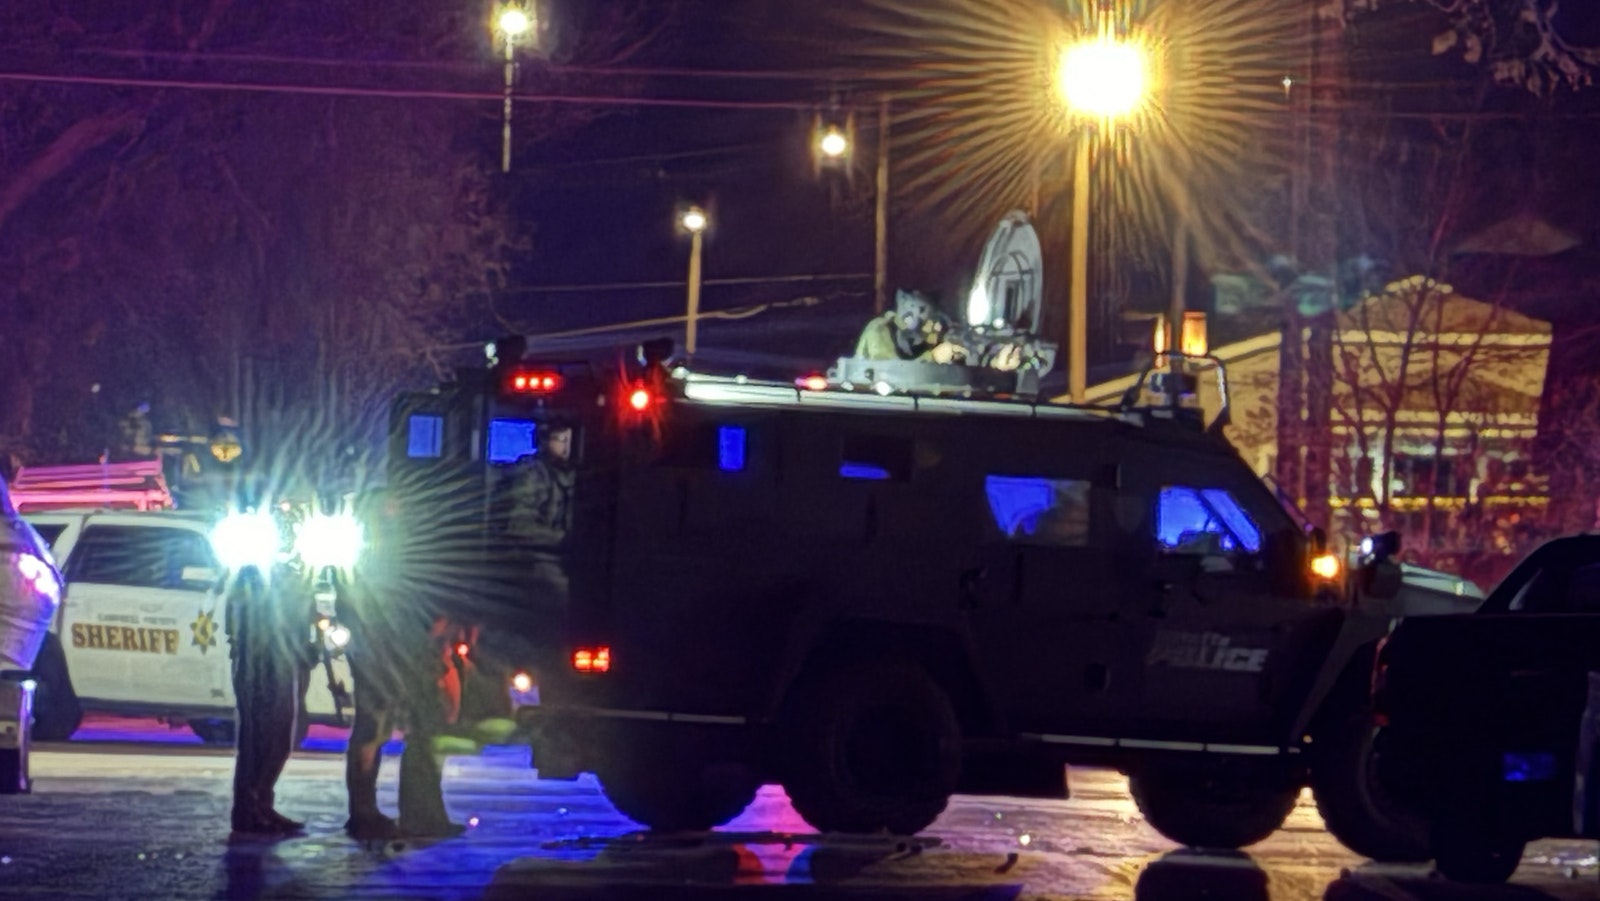 A tactical officer aims a rifle from atop an armored vehicle Tuesday night during a standoff in Sheridan with a man suspected of killing a police officer.